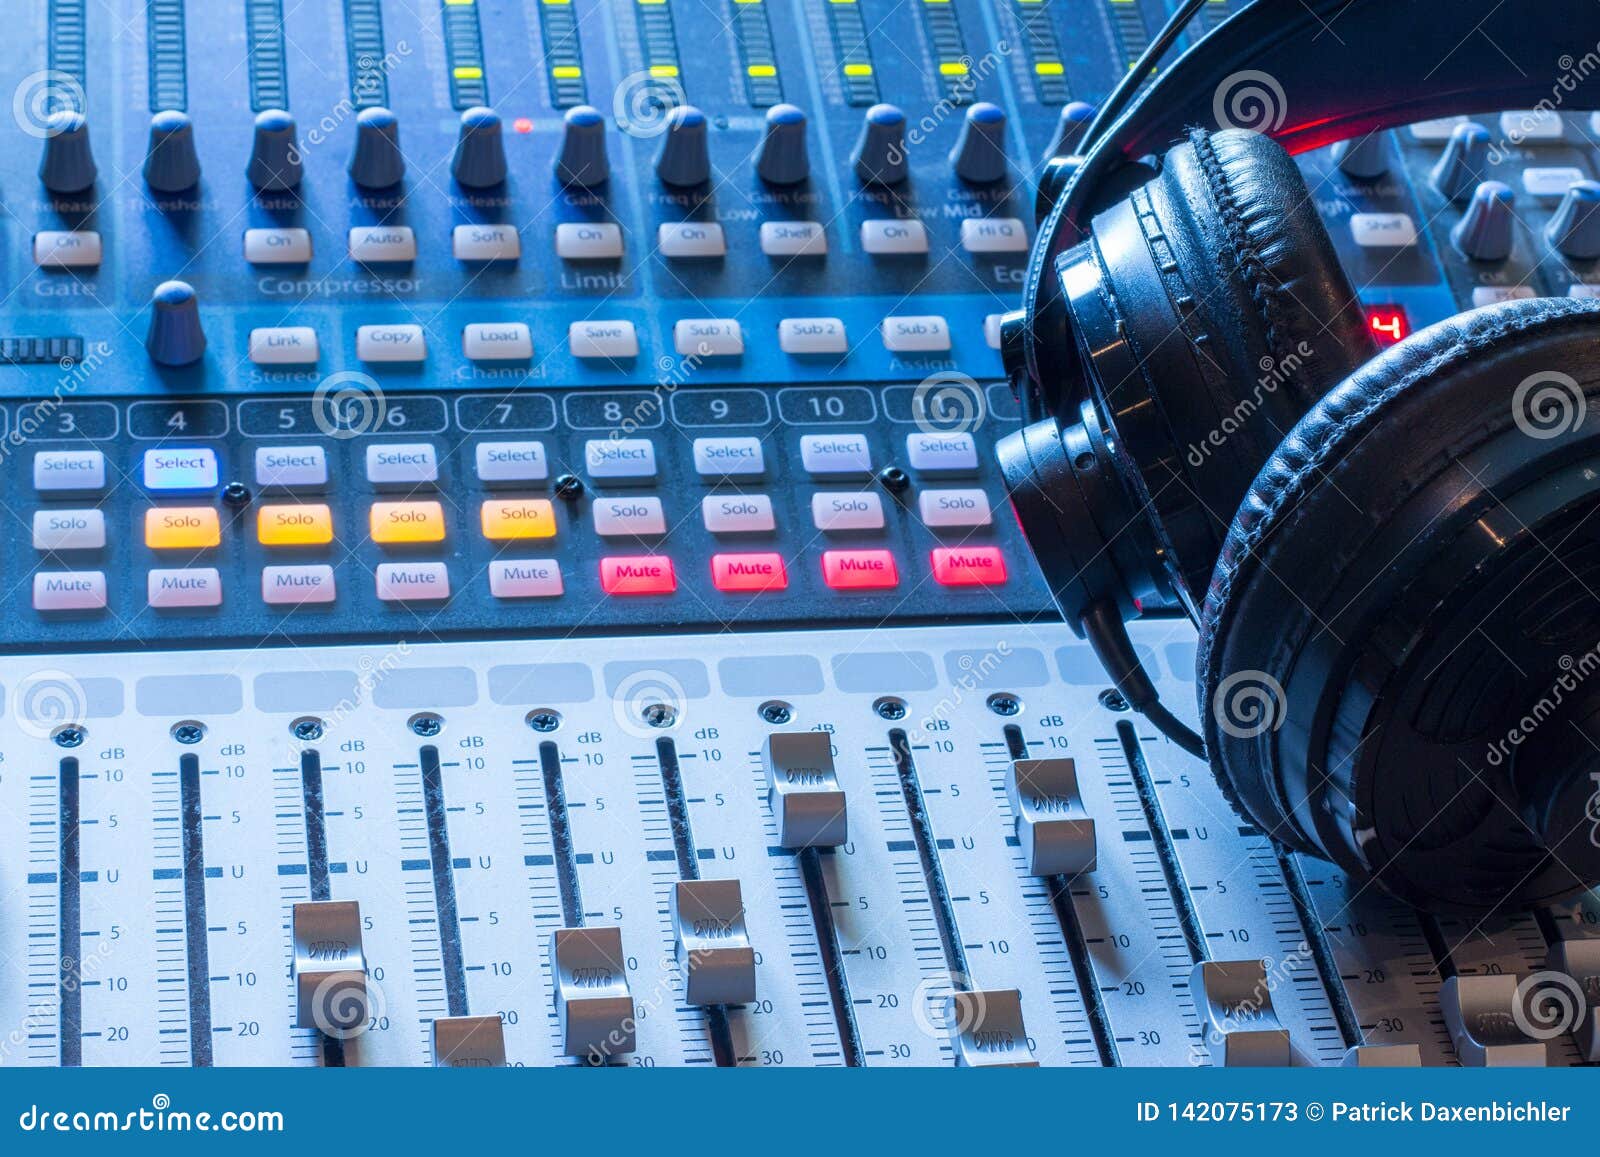 Radio Station Headphones On A Mixer Desk In An Professional Sound